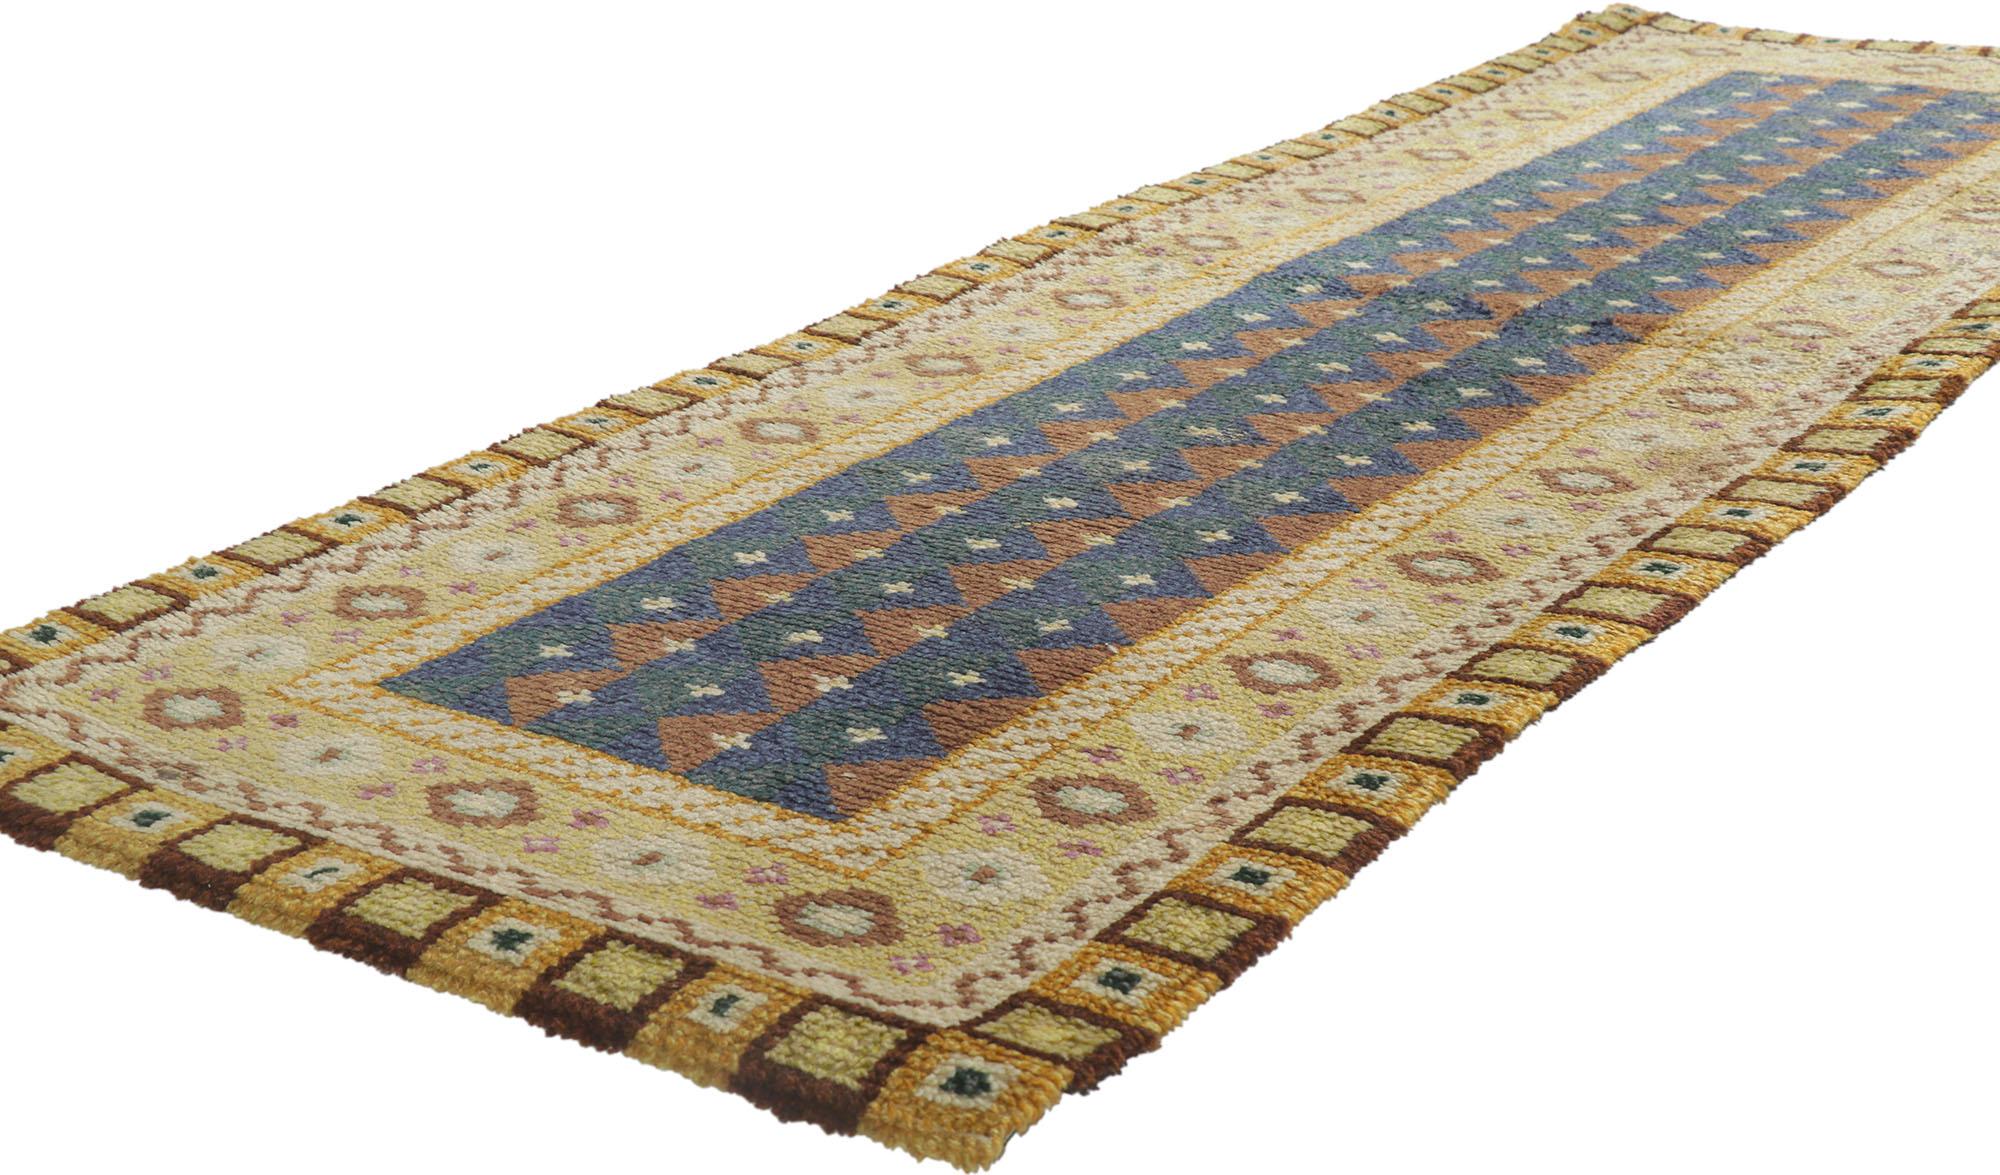 78272 Vintage Finnish Rya Ryijy rug with Scandinavian Modern Style 02'07 x 07'04. Full of tiny details and a bold expressive design combined with folk art tribal style, this hand-knotted wool vintage Finnish Ryijy Rya rug is a captivating vision of